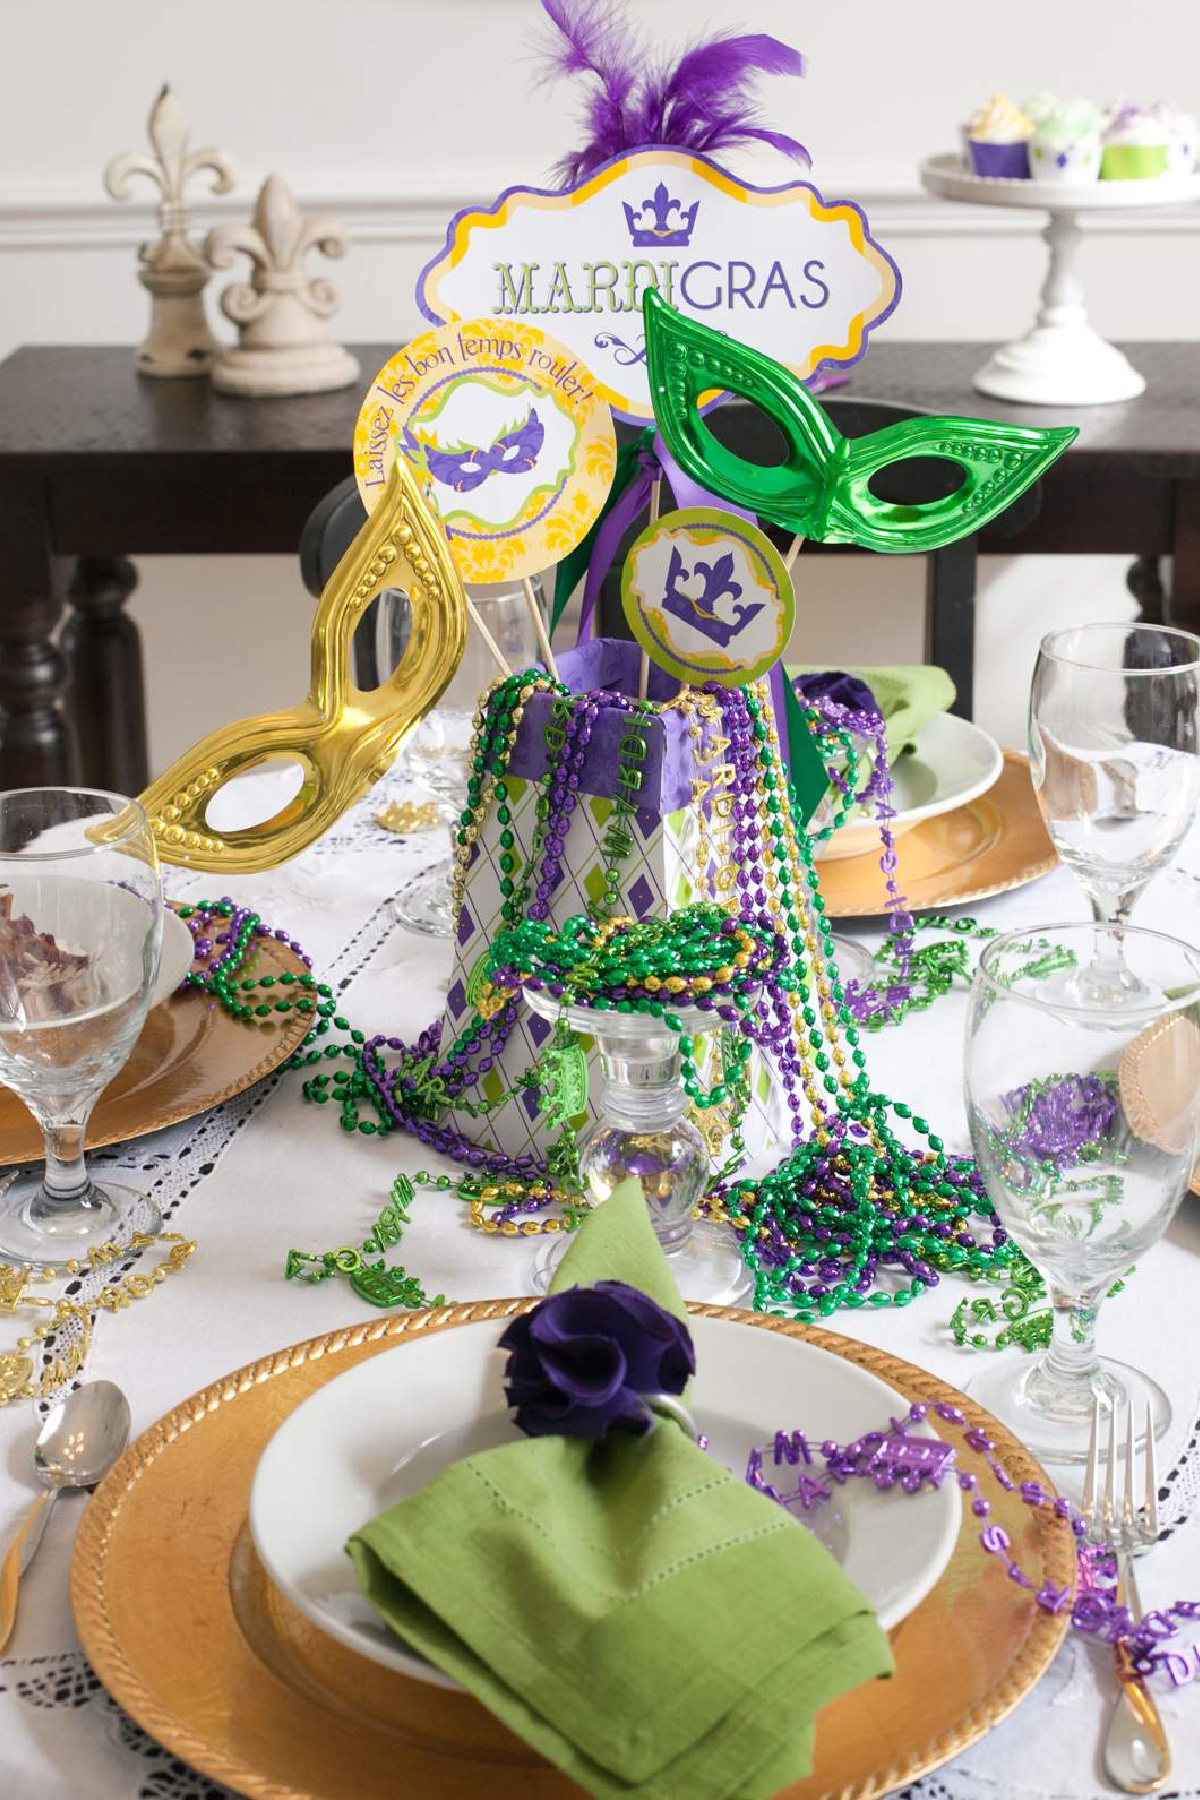 Best Party Themes for Adults  - Mardi Gras Parties